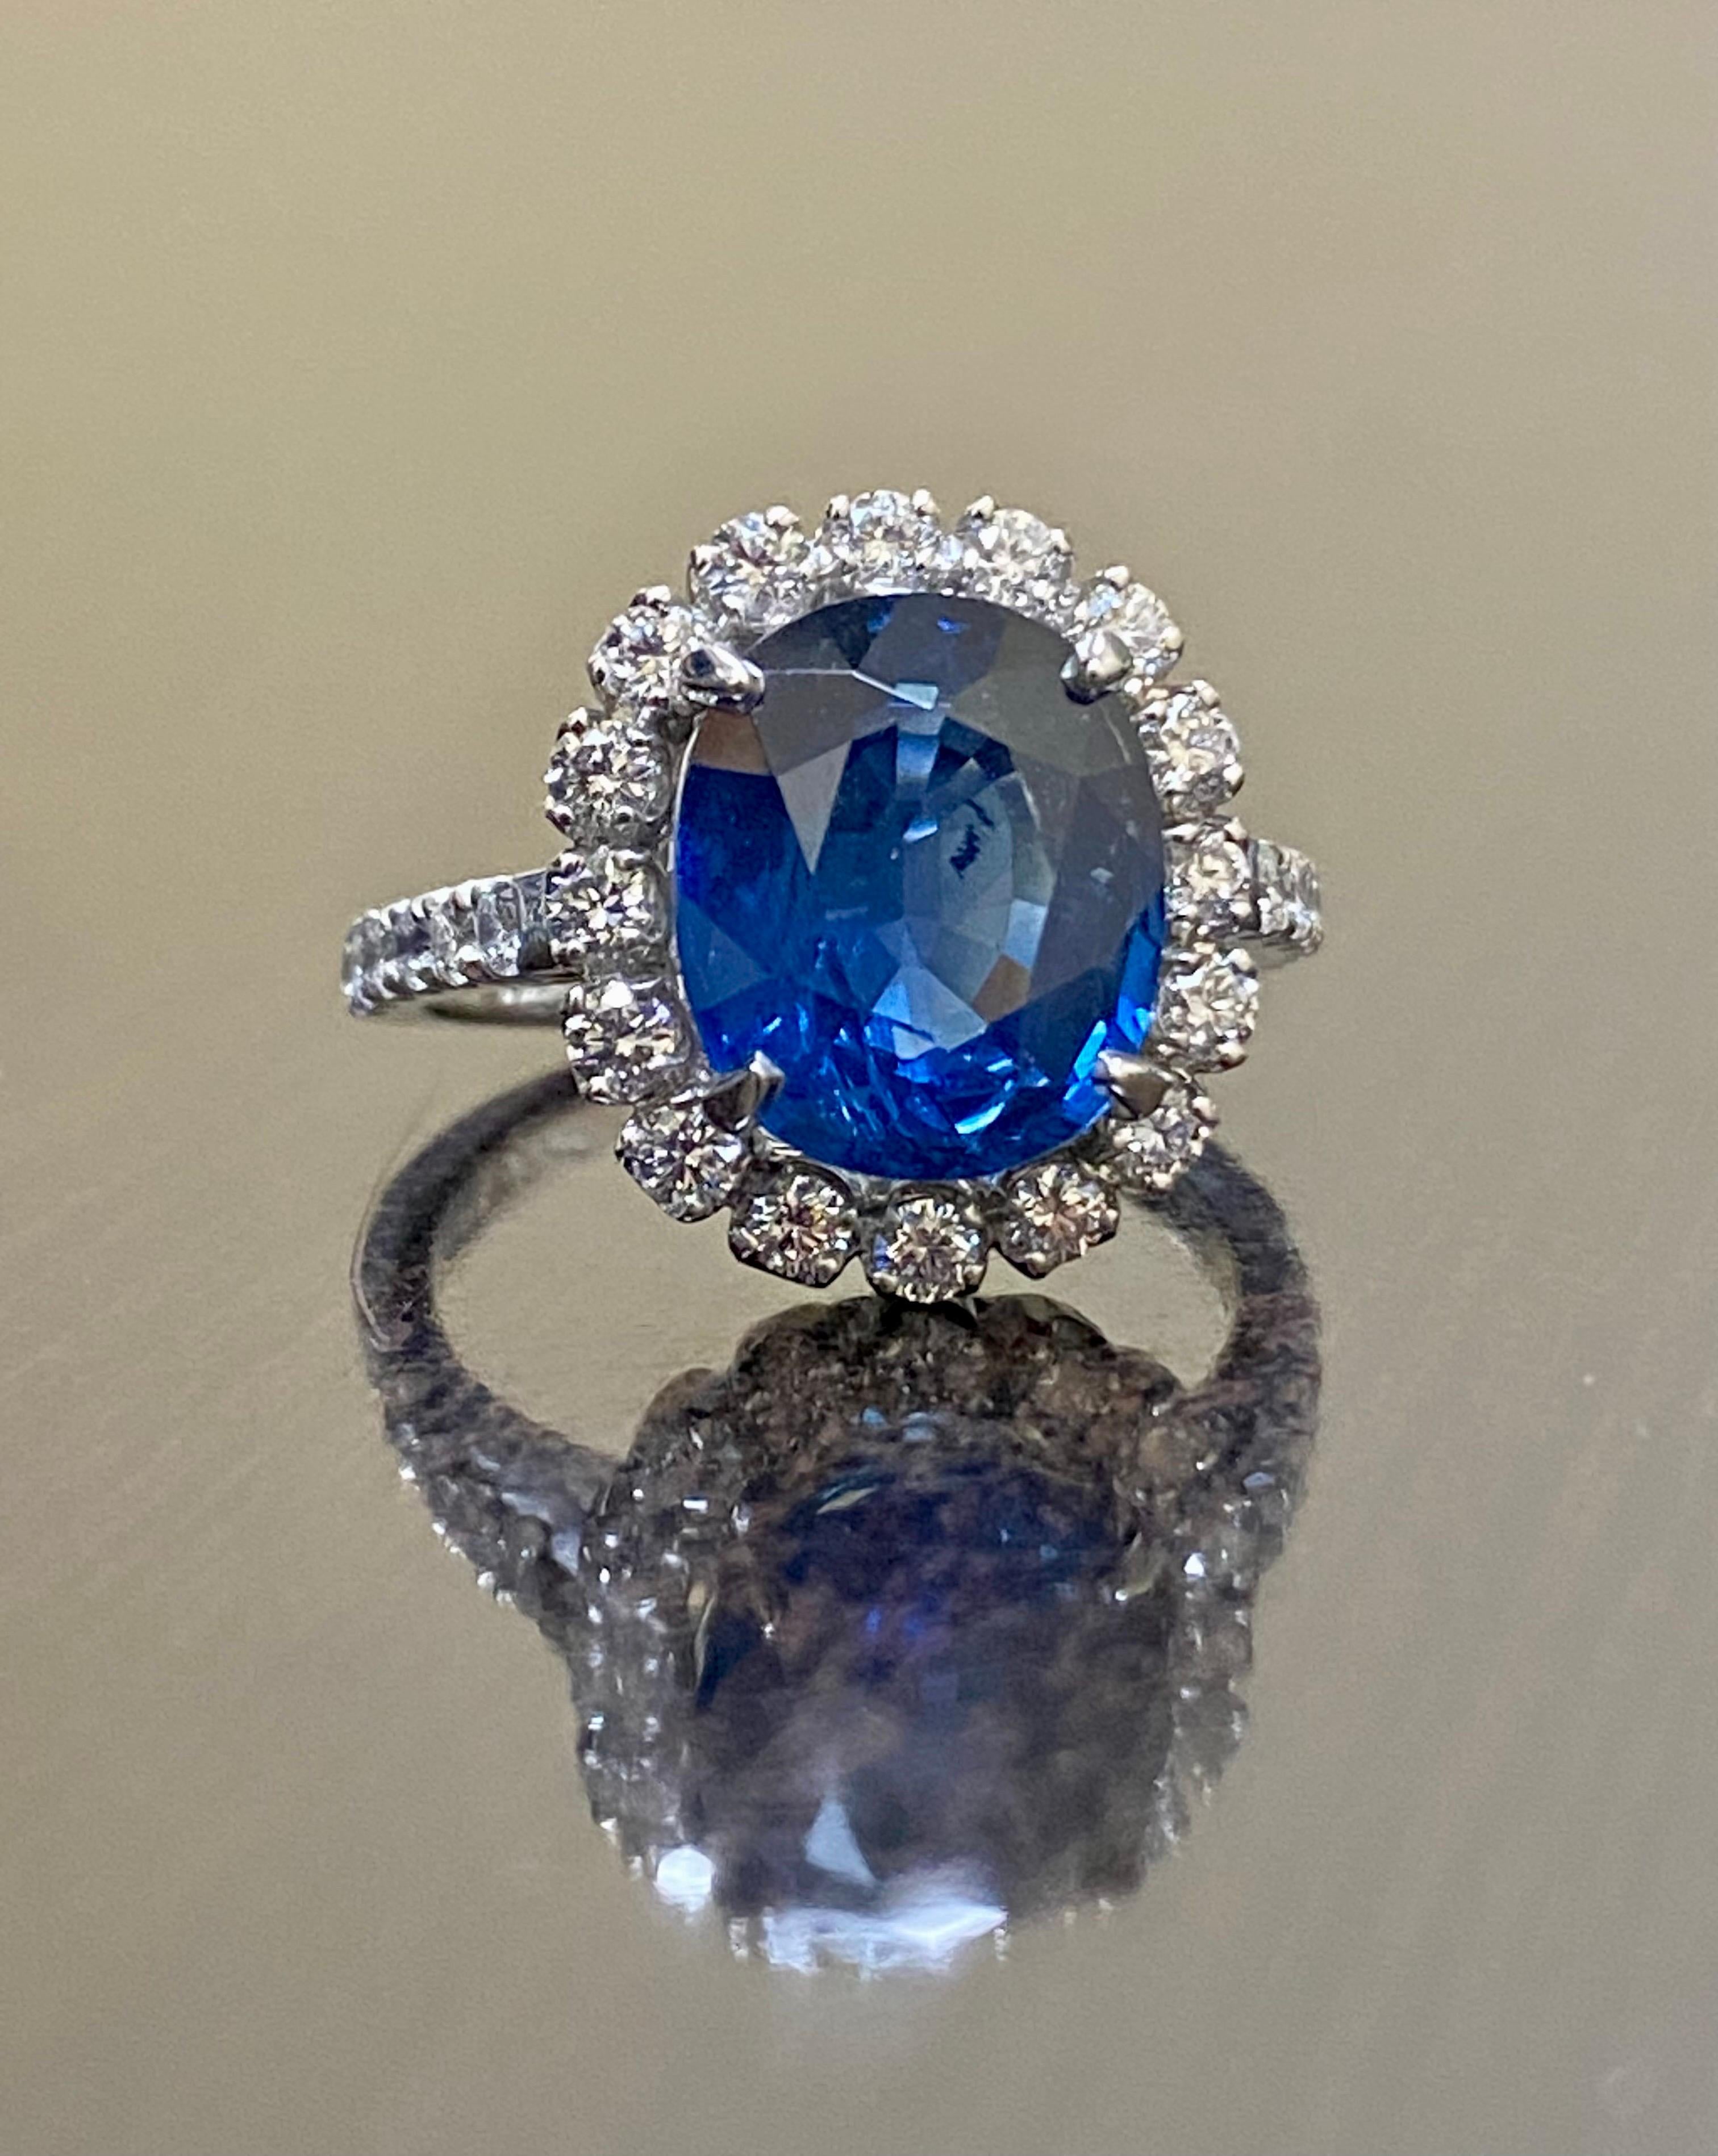 DeKara Designs Collection

Our latest design! An elegant and lustrous Oval Blue Sapphire surrounded beautifully by diamonds in a halo setting.

Metal- 90% Platinum, 10% Iridium.

Stones- Genuine Oval Blue Sapphire 5.33 Carats, 28 Round Diamonds F-G